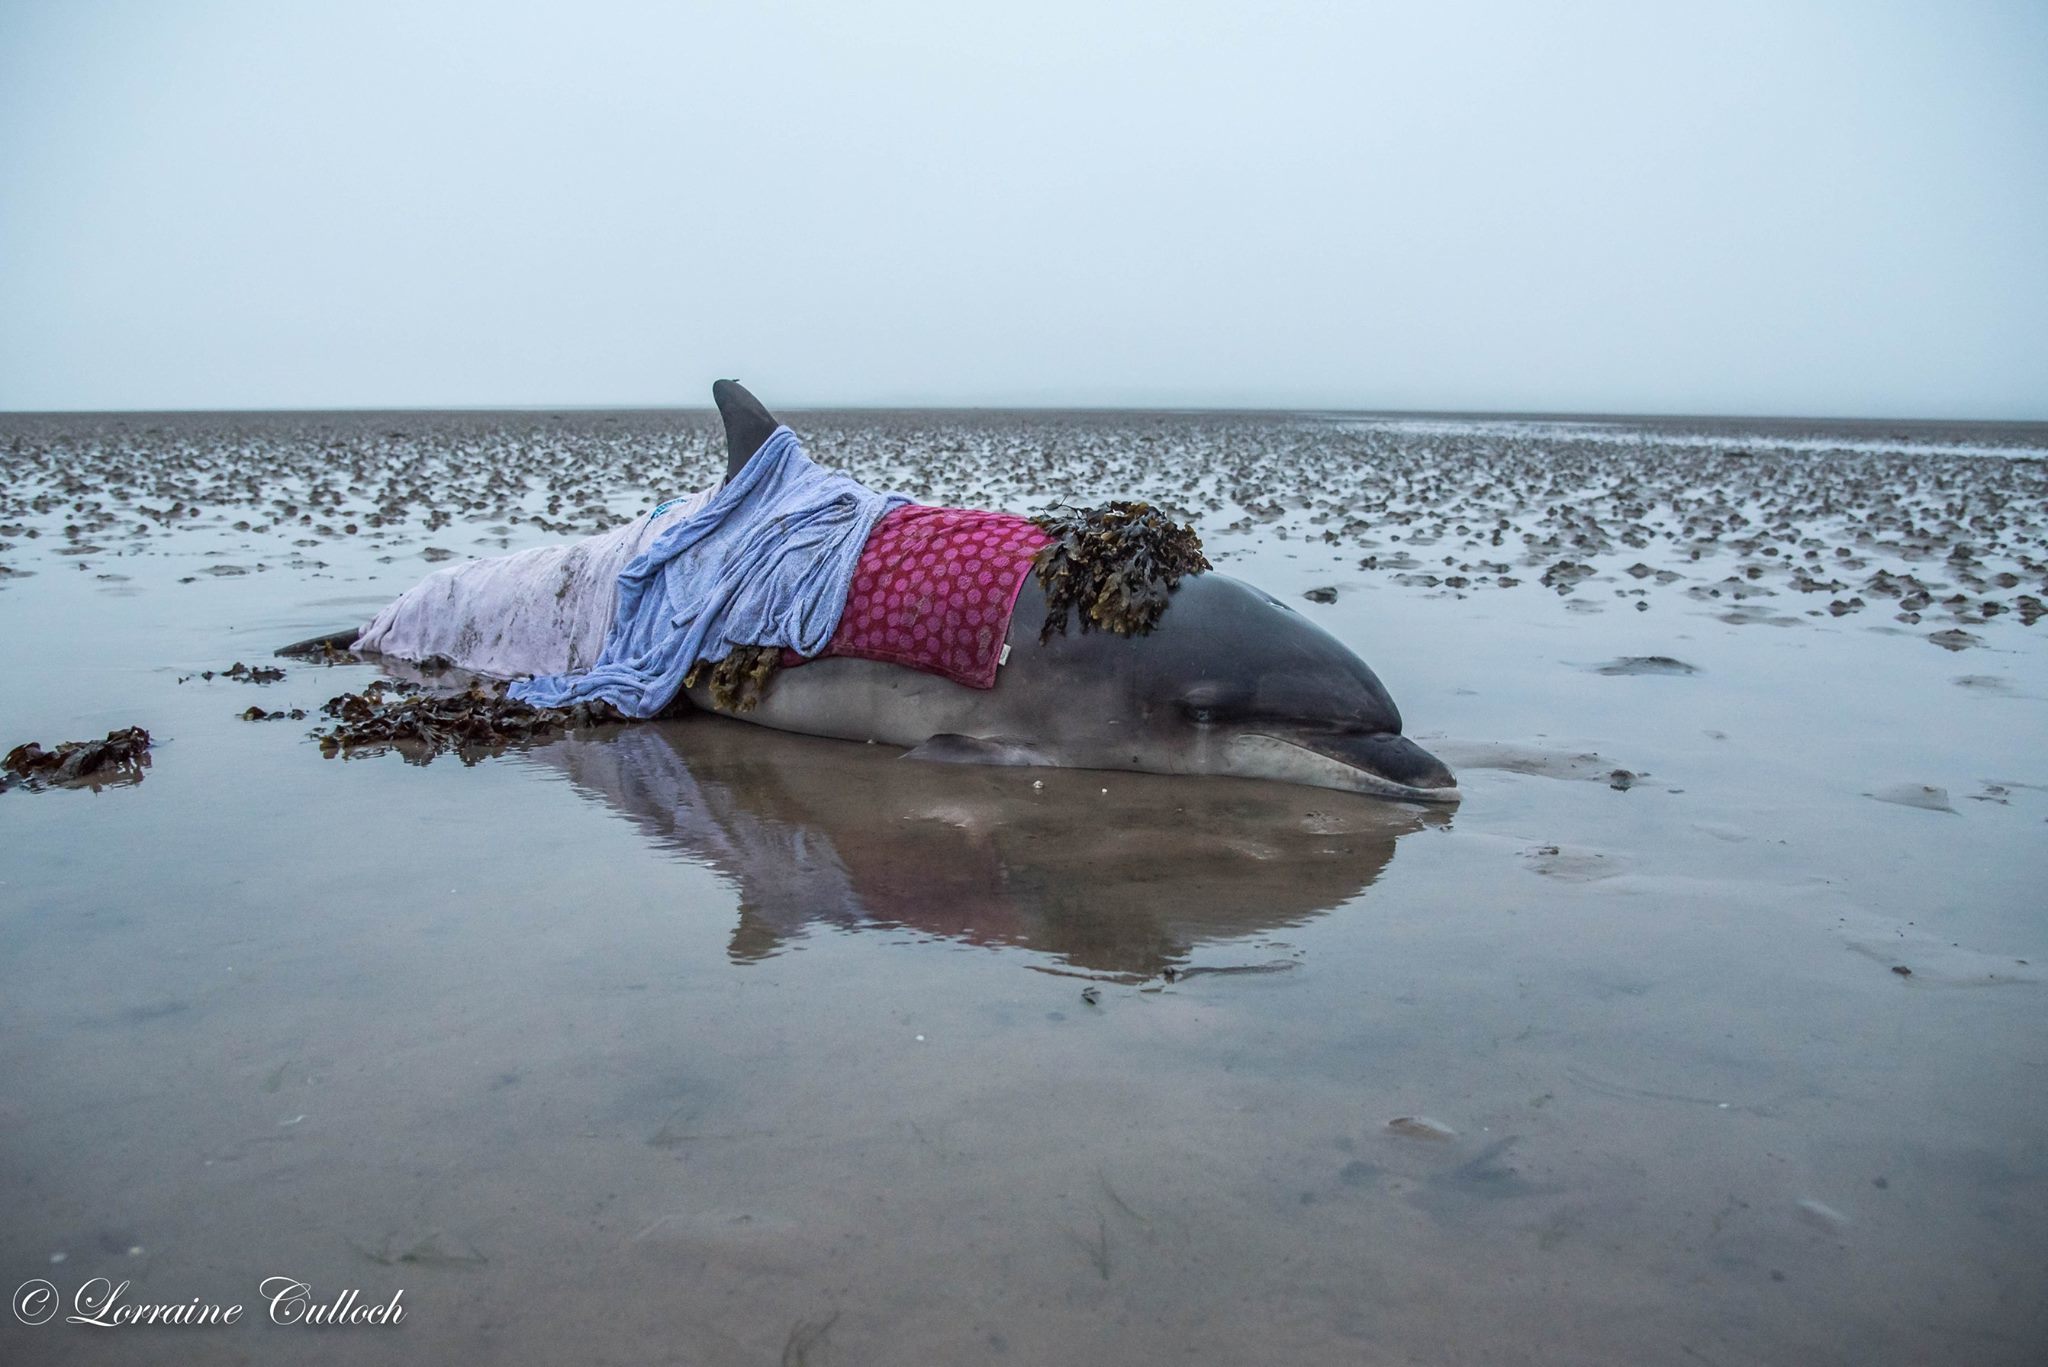 The dolphin was found washed up on the shore